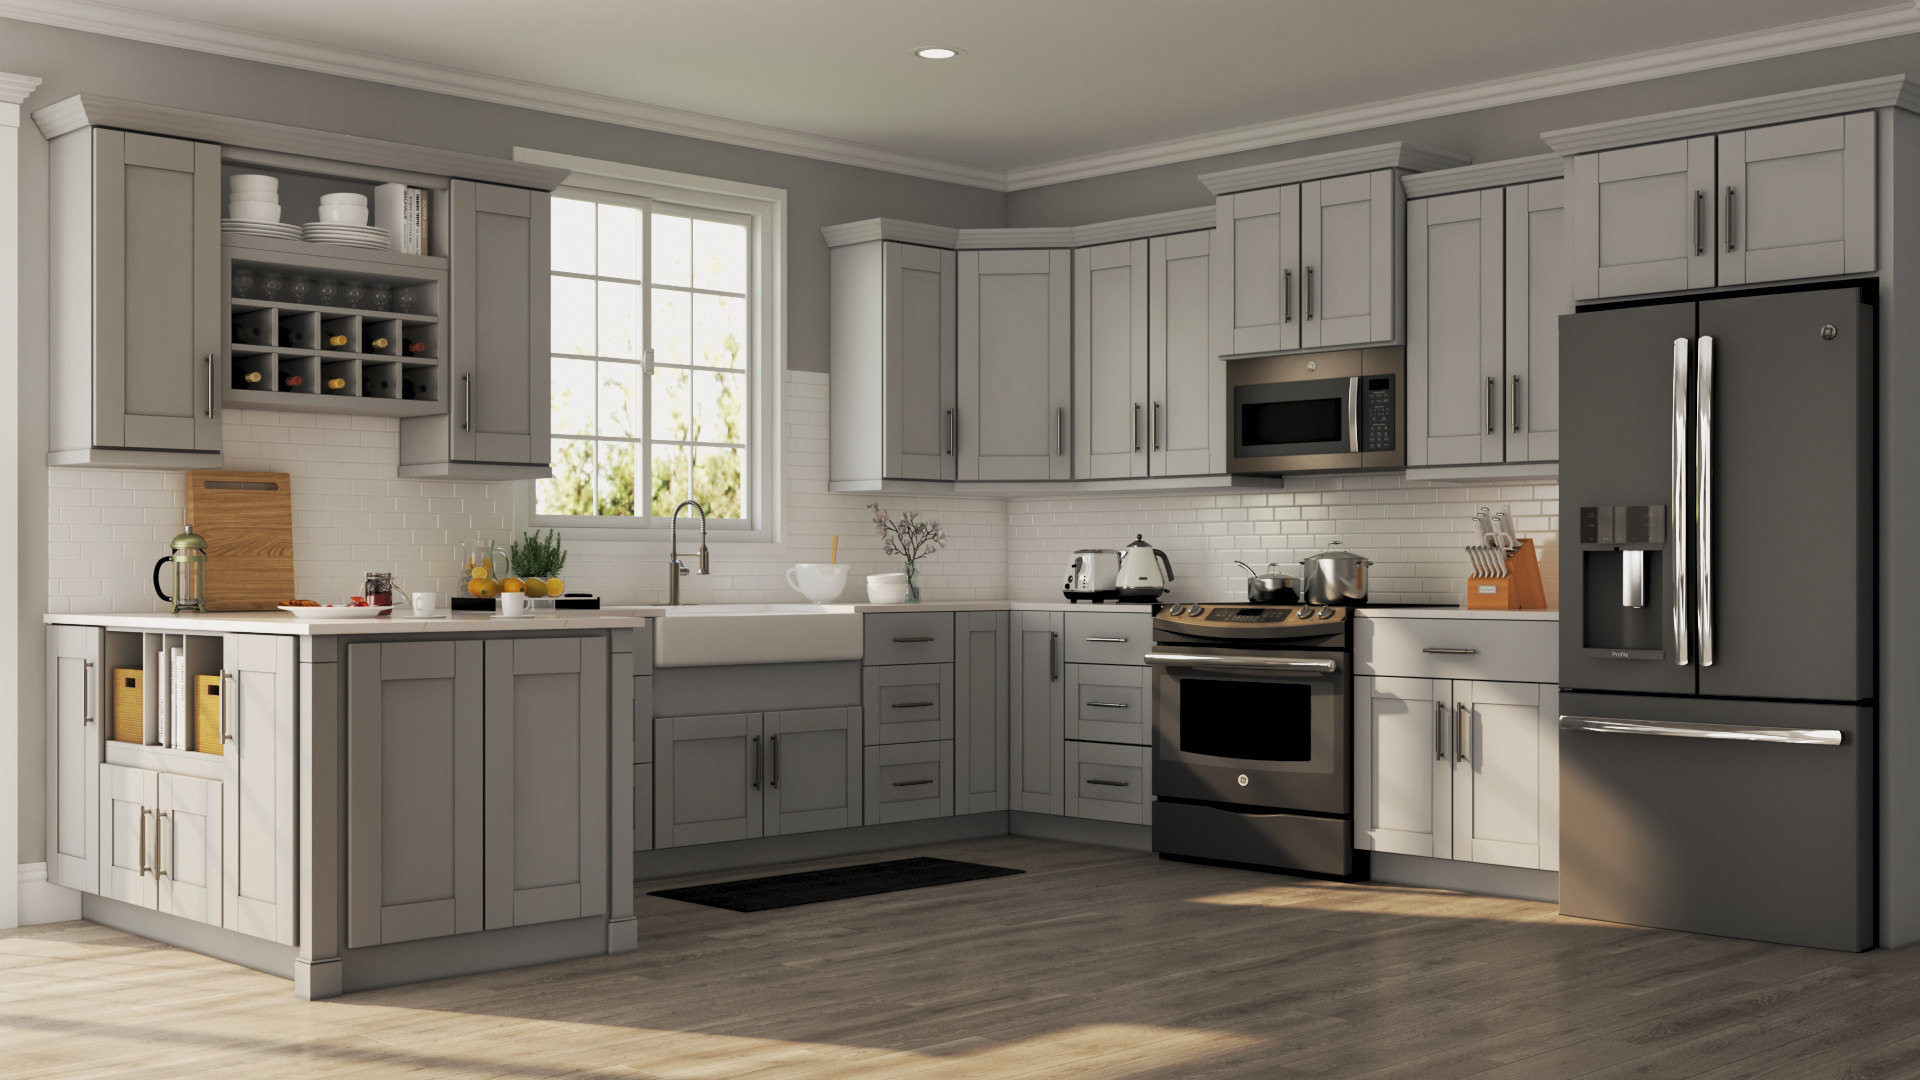 Wall Cabinet Kitchen
 Shaker Wall Cabinets in Dove Gray – Kitchen – The Home Depot